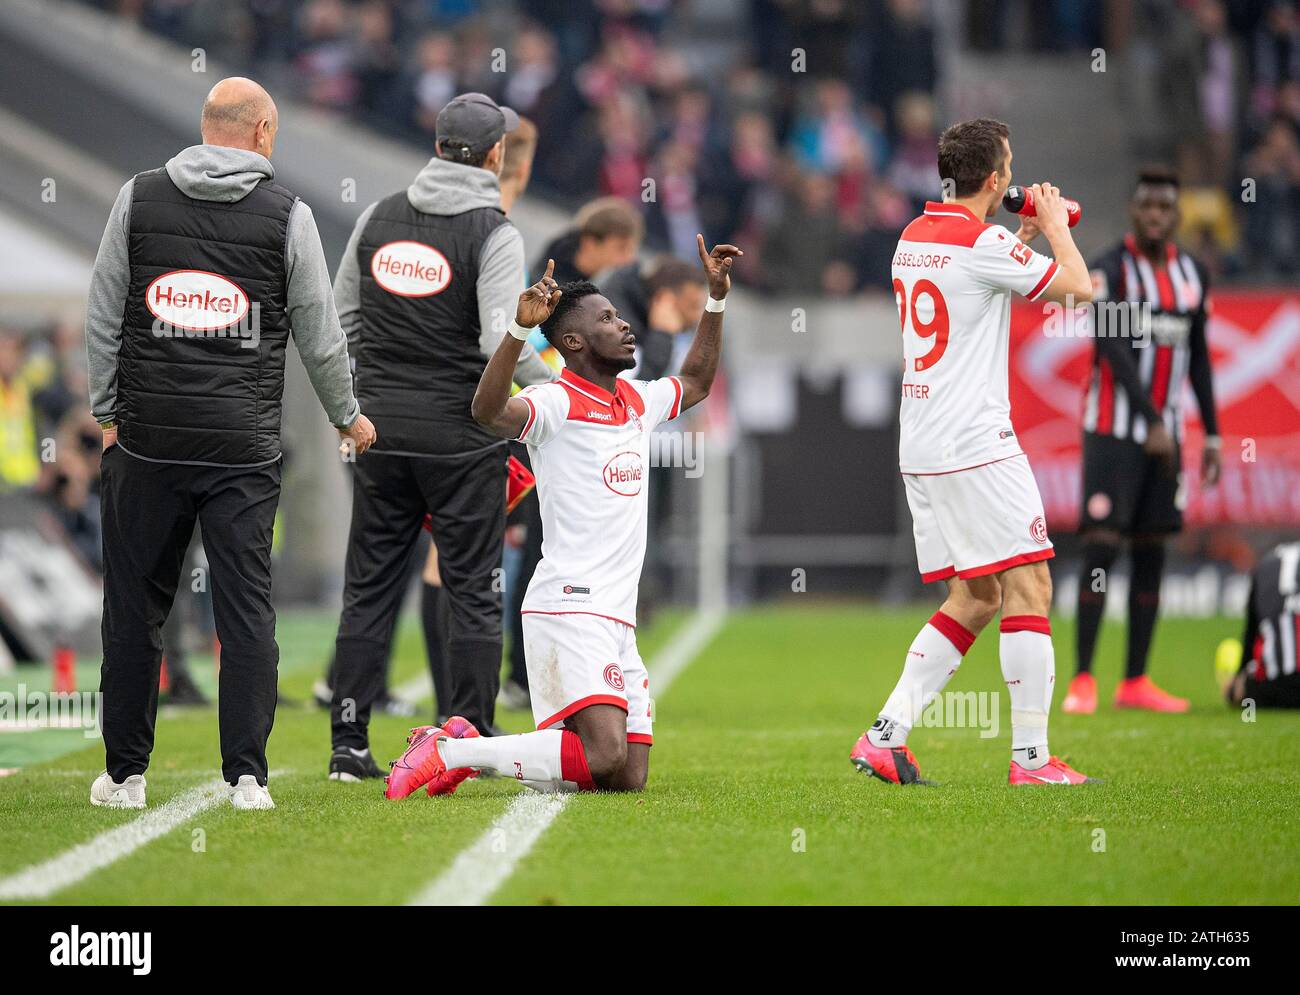 jubilation Opoku 'Nana' AMPOMAH withte (D) after his goal, which is withdrawn by video evidence, l. coach Uwe ROESLER (Rv? sler) (D) Soccer 1.Bundesliga, 20.matchday, Fortuna Dusseldorf (D) - Eintracht Frankfurt (F) 1: 1, on 01.02.2020 in Duesseldorf/Germany. ¬ | usage worldwide Stock Photo